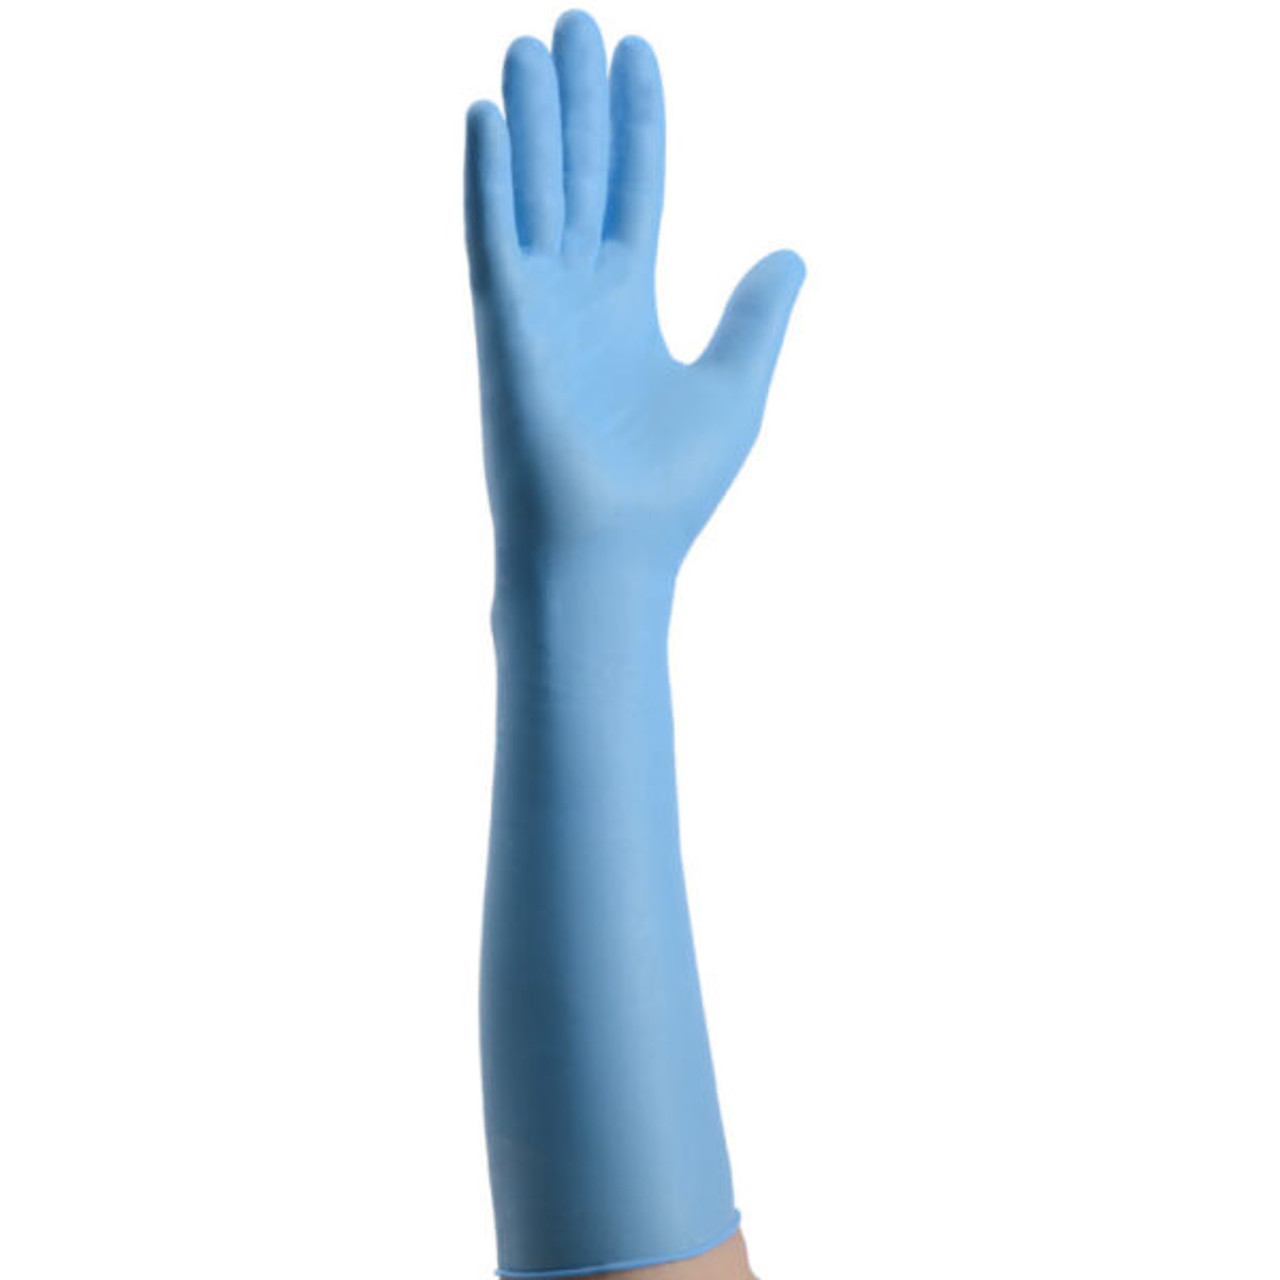 Medgluv Nitrapro Nitrile Exam Glove, 16" Cuff, Chemo Tested, Textured, 7.9mil, Large 50/bx, 10/cs